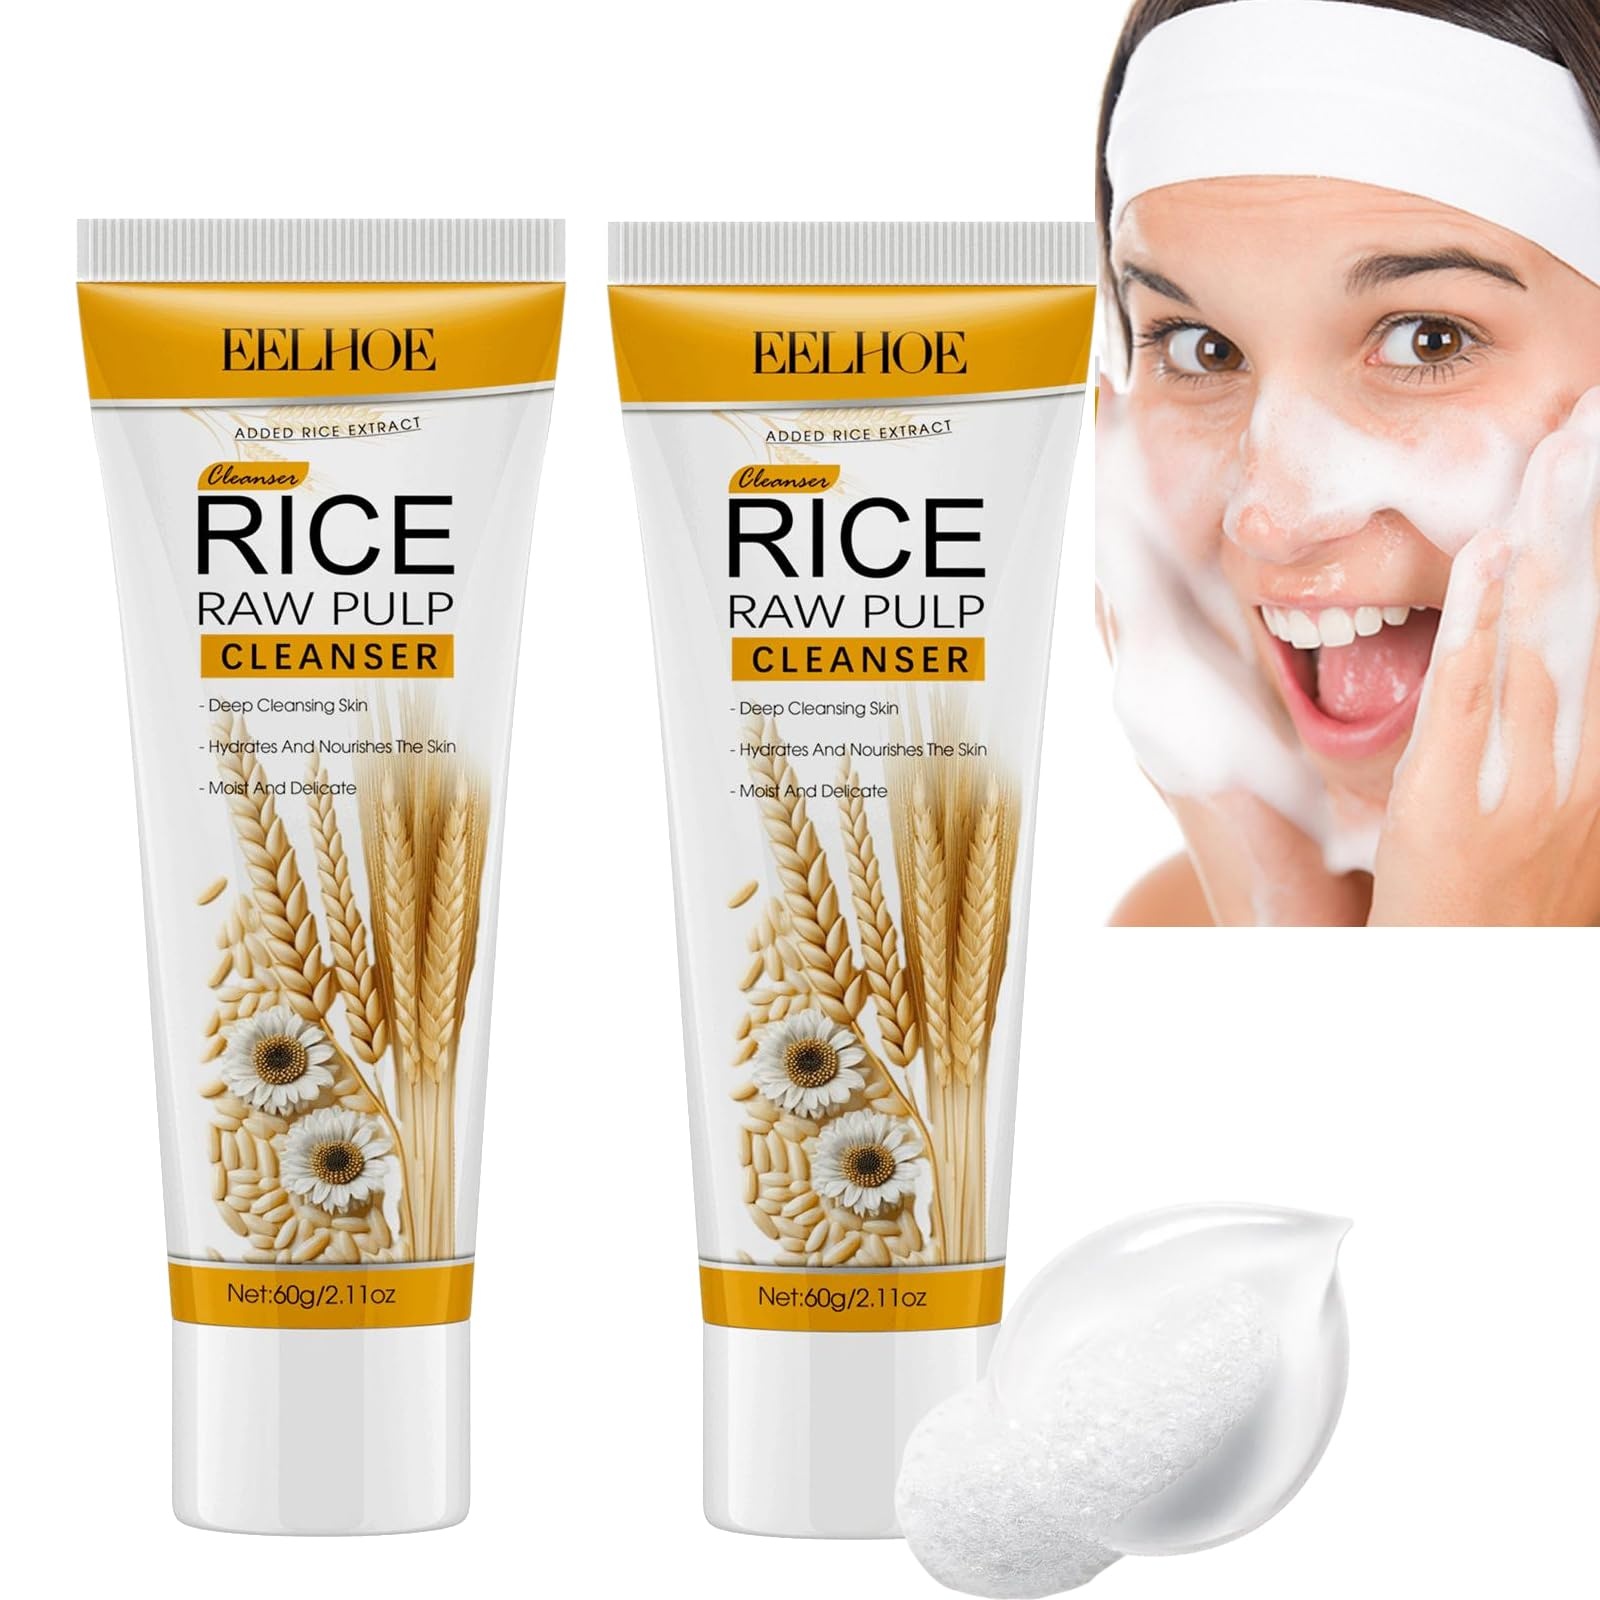 Rice Puree Cleansing Foam, Refreshing Face Wash Rice Bran Extract and Rice Powde, Hydrating Face Cleanser with Rice Bran & Ceramides, Firming Bubble Facial Foam Cleanser, for All